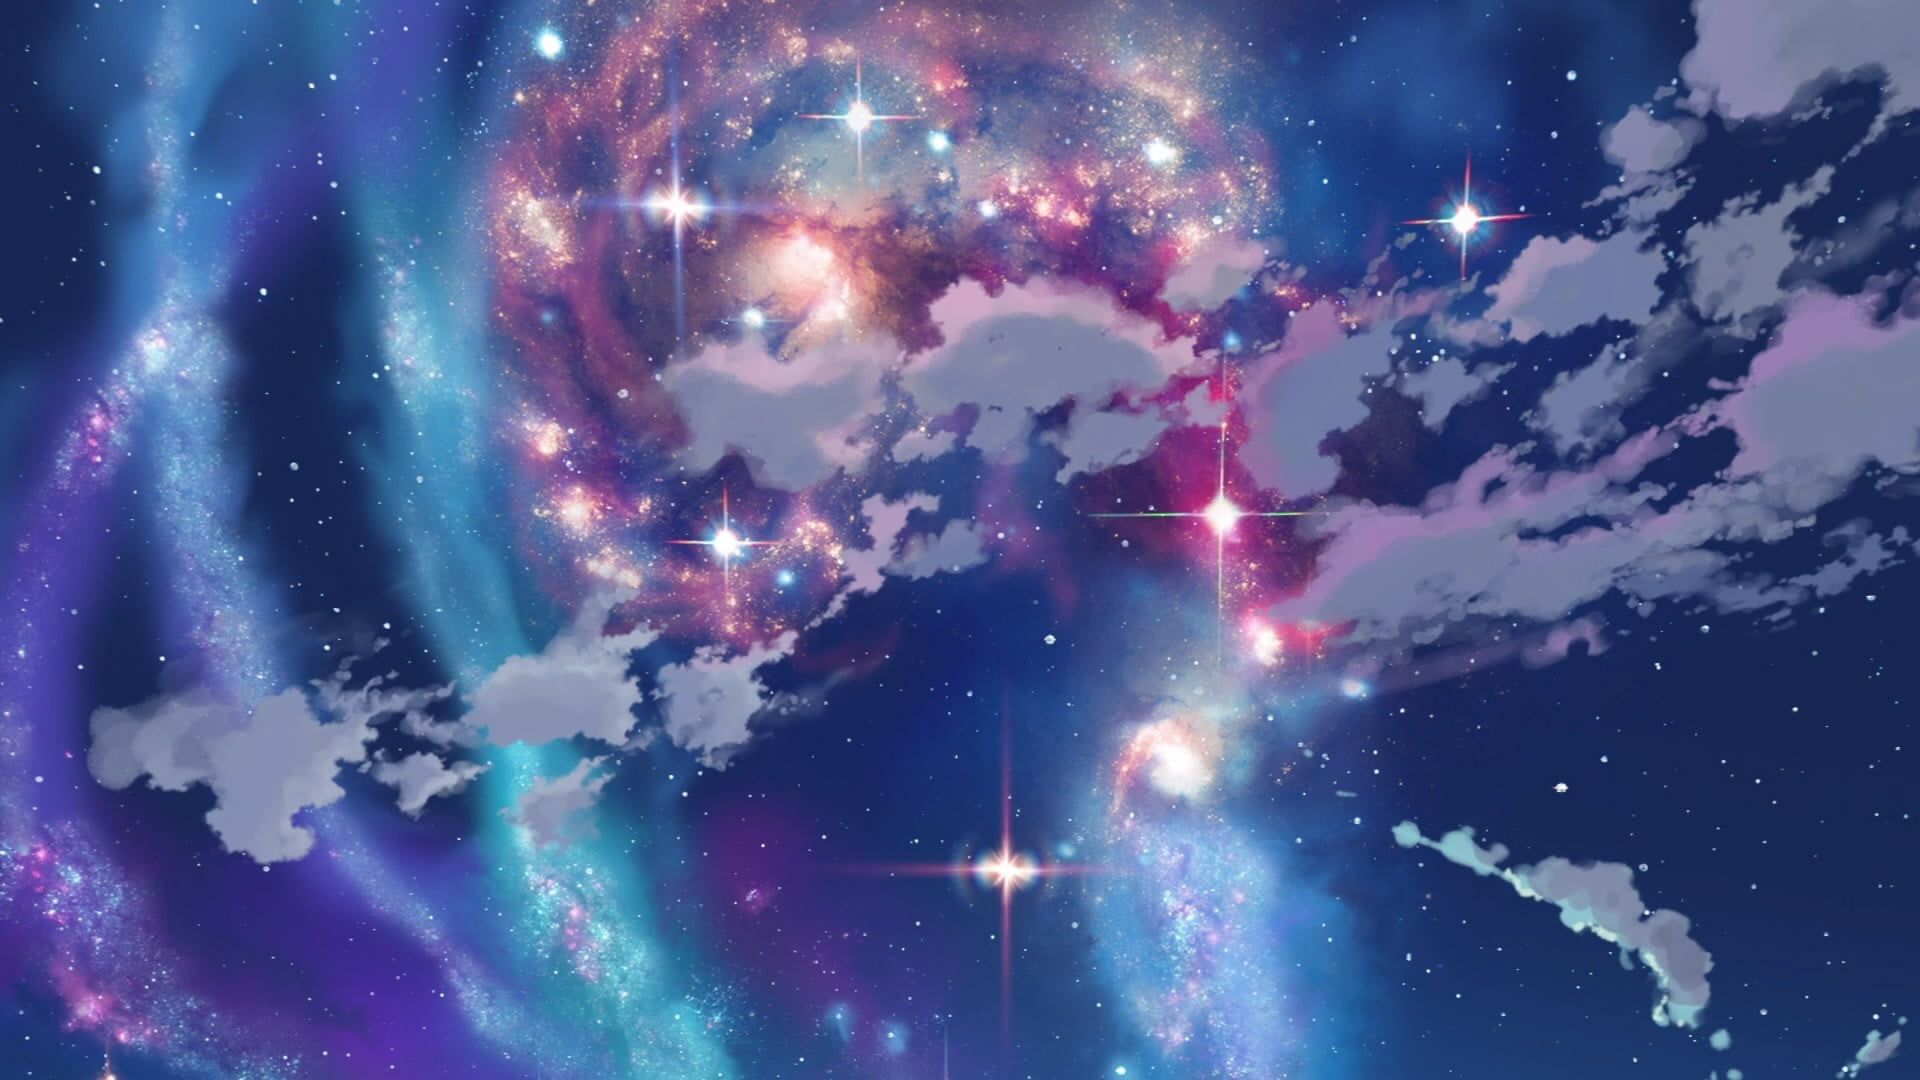 Made some anime space backgrounds anime style hd wallpaper of outer space  horizon glittering stars scattered about lilac colors    rStableDiffusion